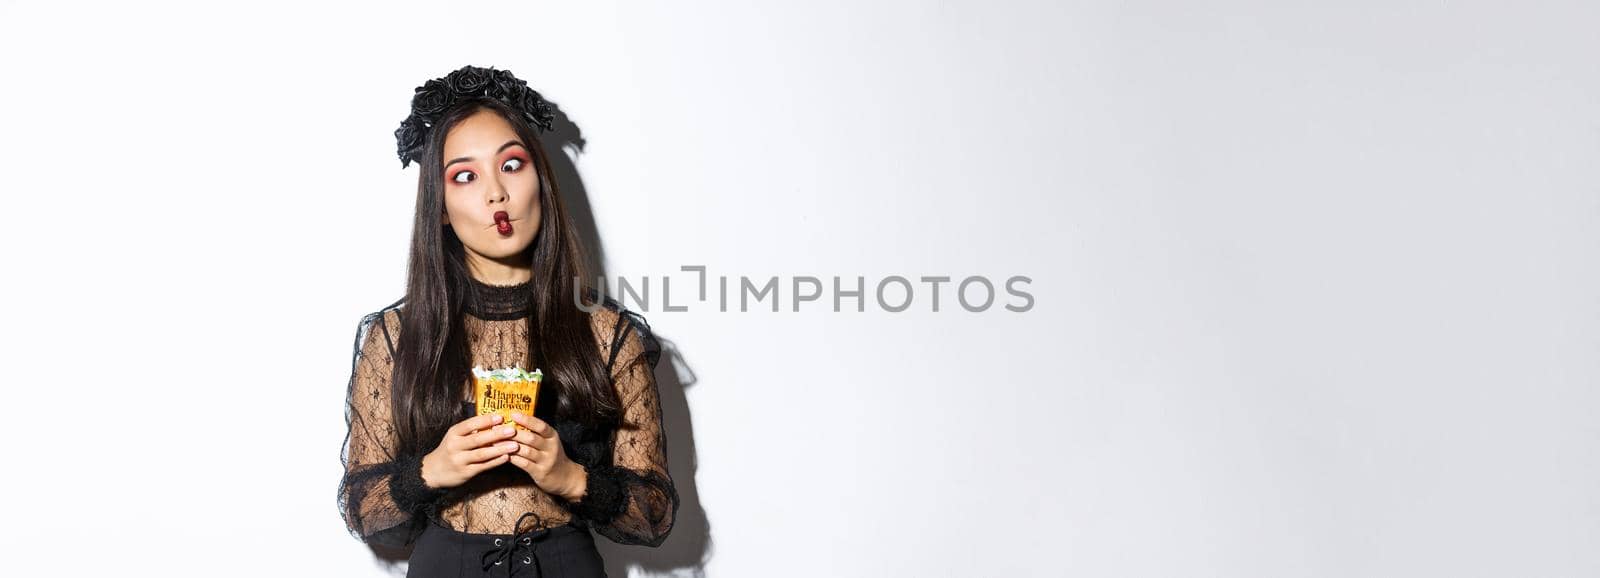 Image of funny carefree girl celebrating halloween in witch costume, making silly faces and holding treats, standing over white background.